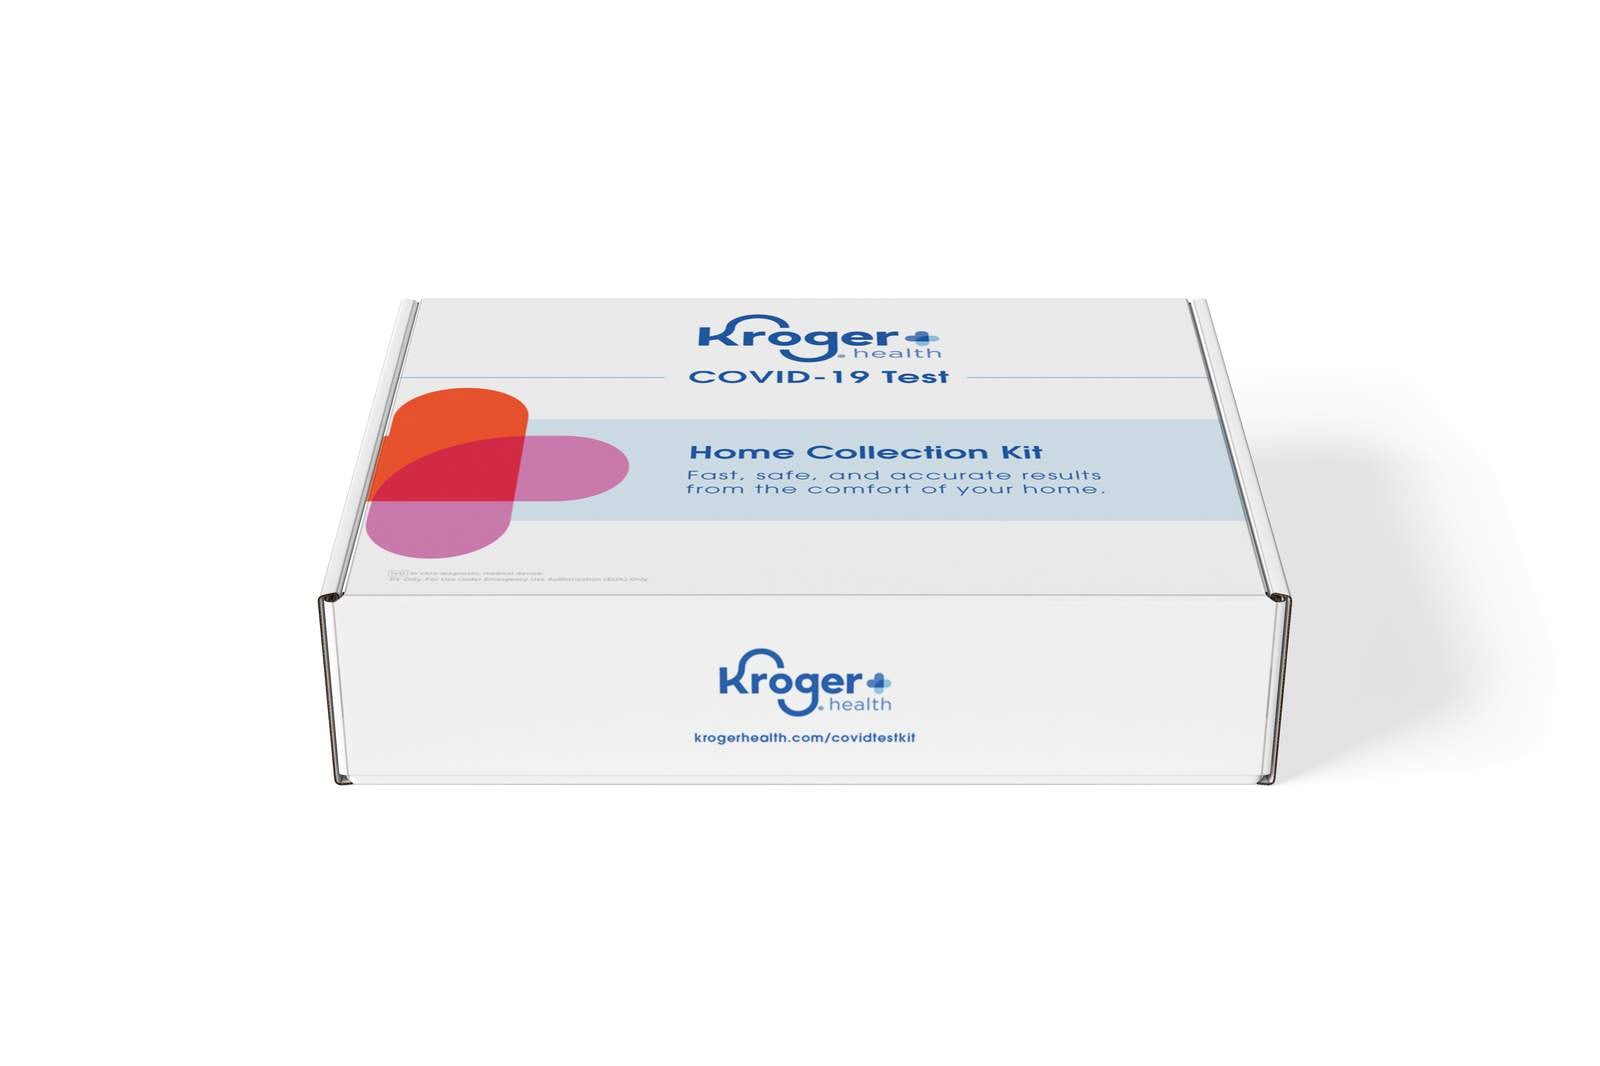 COVID-19 at-home test: What you need to know about the Kroger test just approved by the FDA